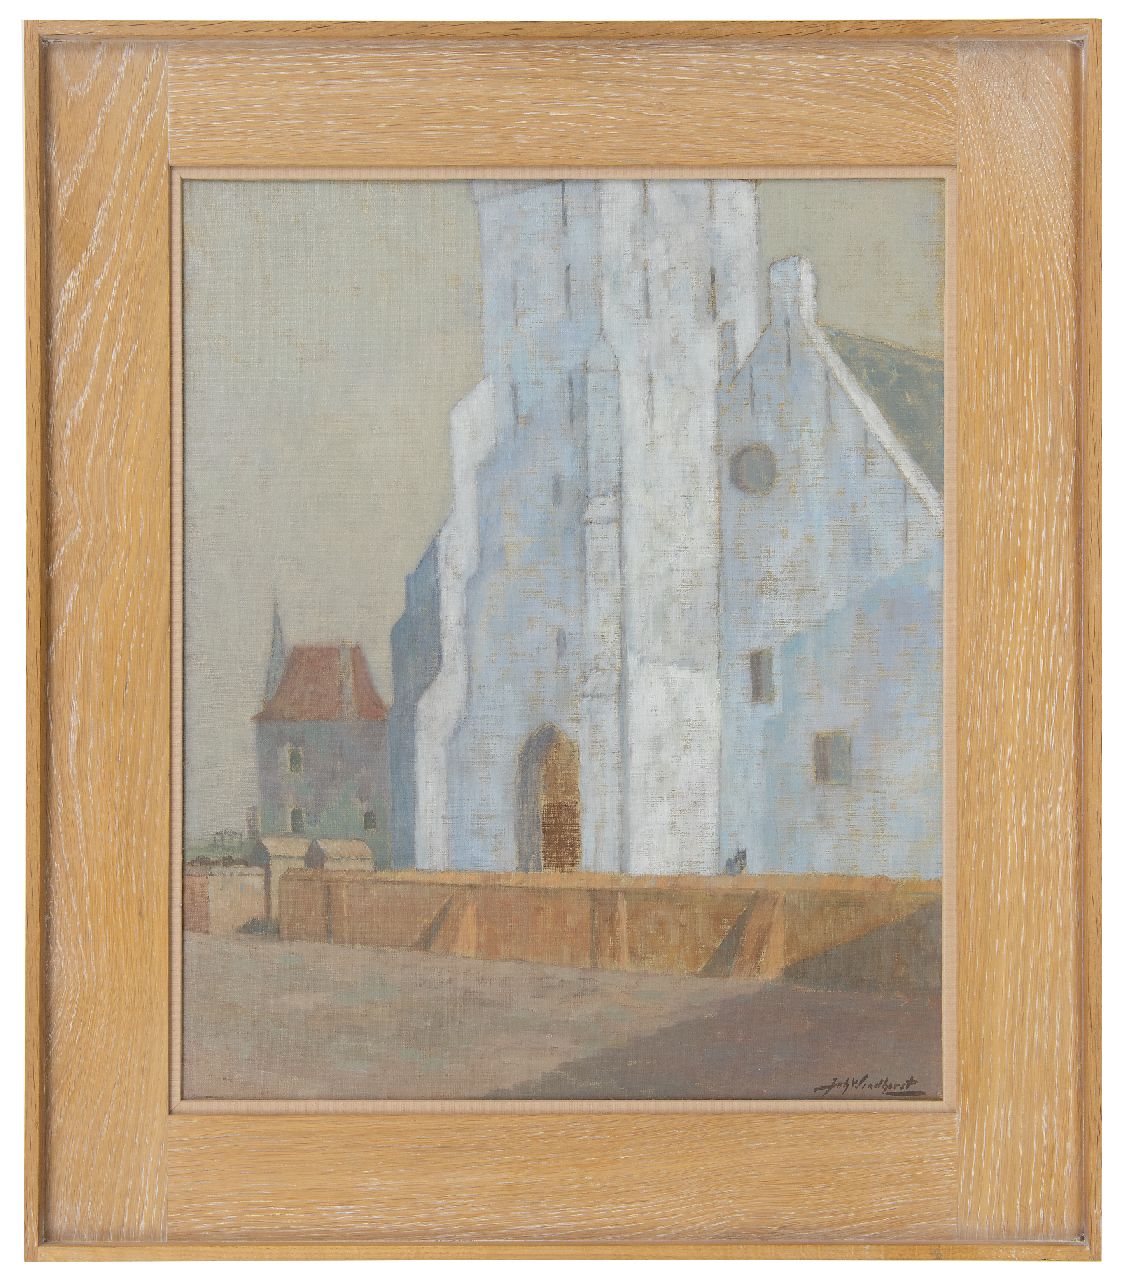 Windhorst J.C.  | Johann Christoph 'Johan' Windhorst | Paintings offered for sale | The Andreaskerk, Katwijk aan Zee, oil on canvas 50.6 x 41.5 cm, signed l.r. and dated September 1928 on the stretcher